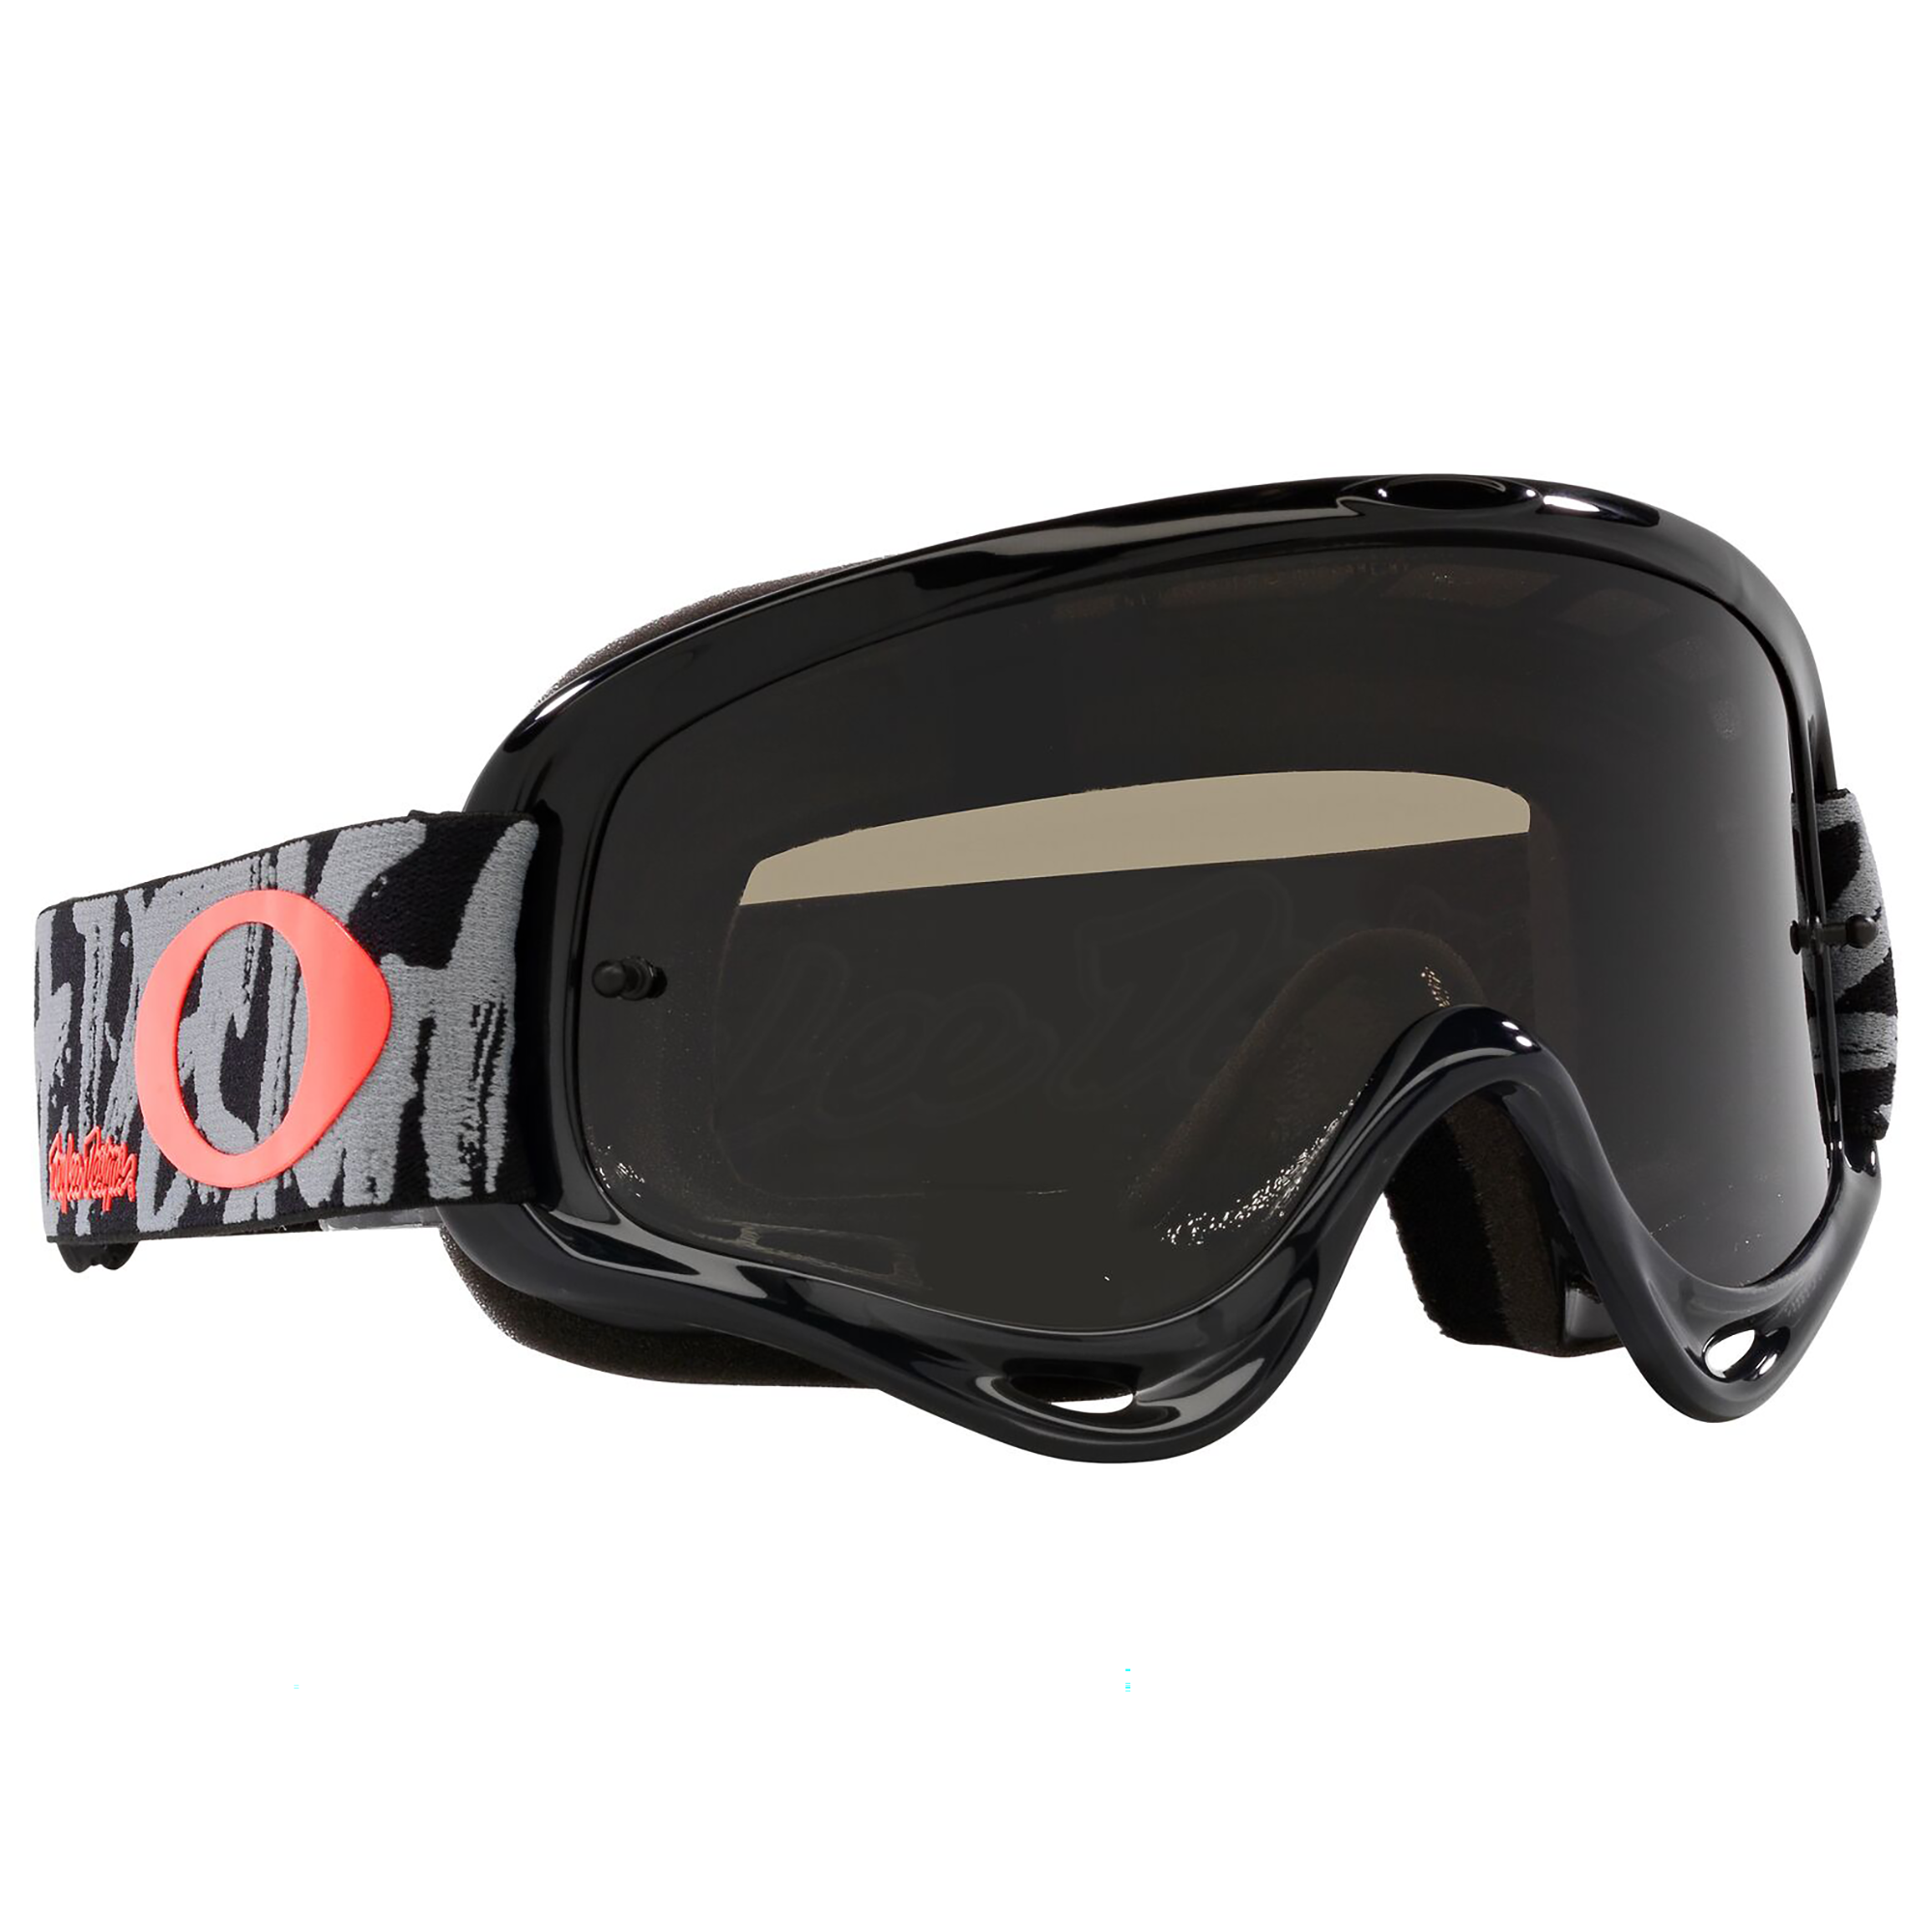 Oakley O Frame TLD Collection MX Goggle in Painted Black with Dark Grey Lens